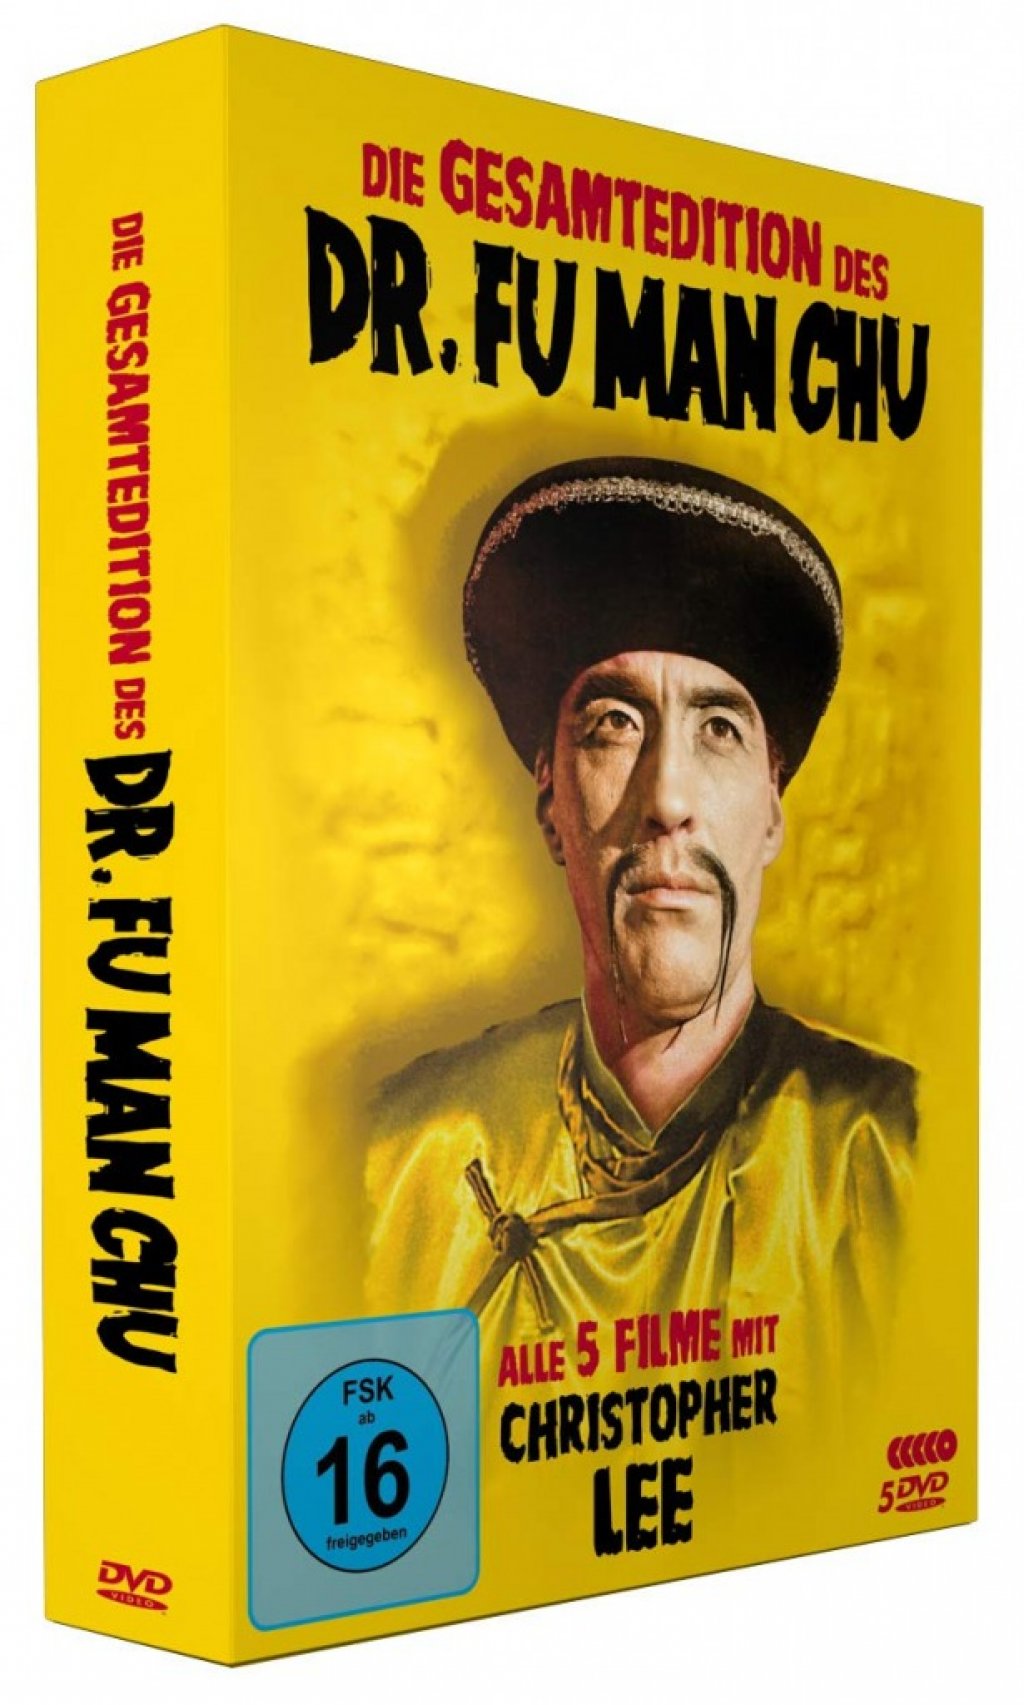 Dr Fu Man Chu Meets the Lonesome Cowboy by Eugenia Macer-Story